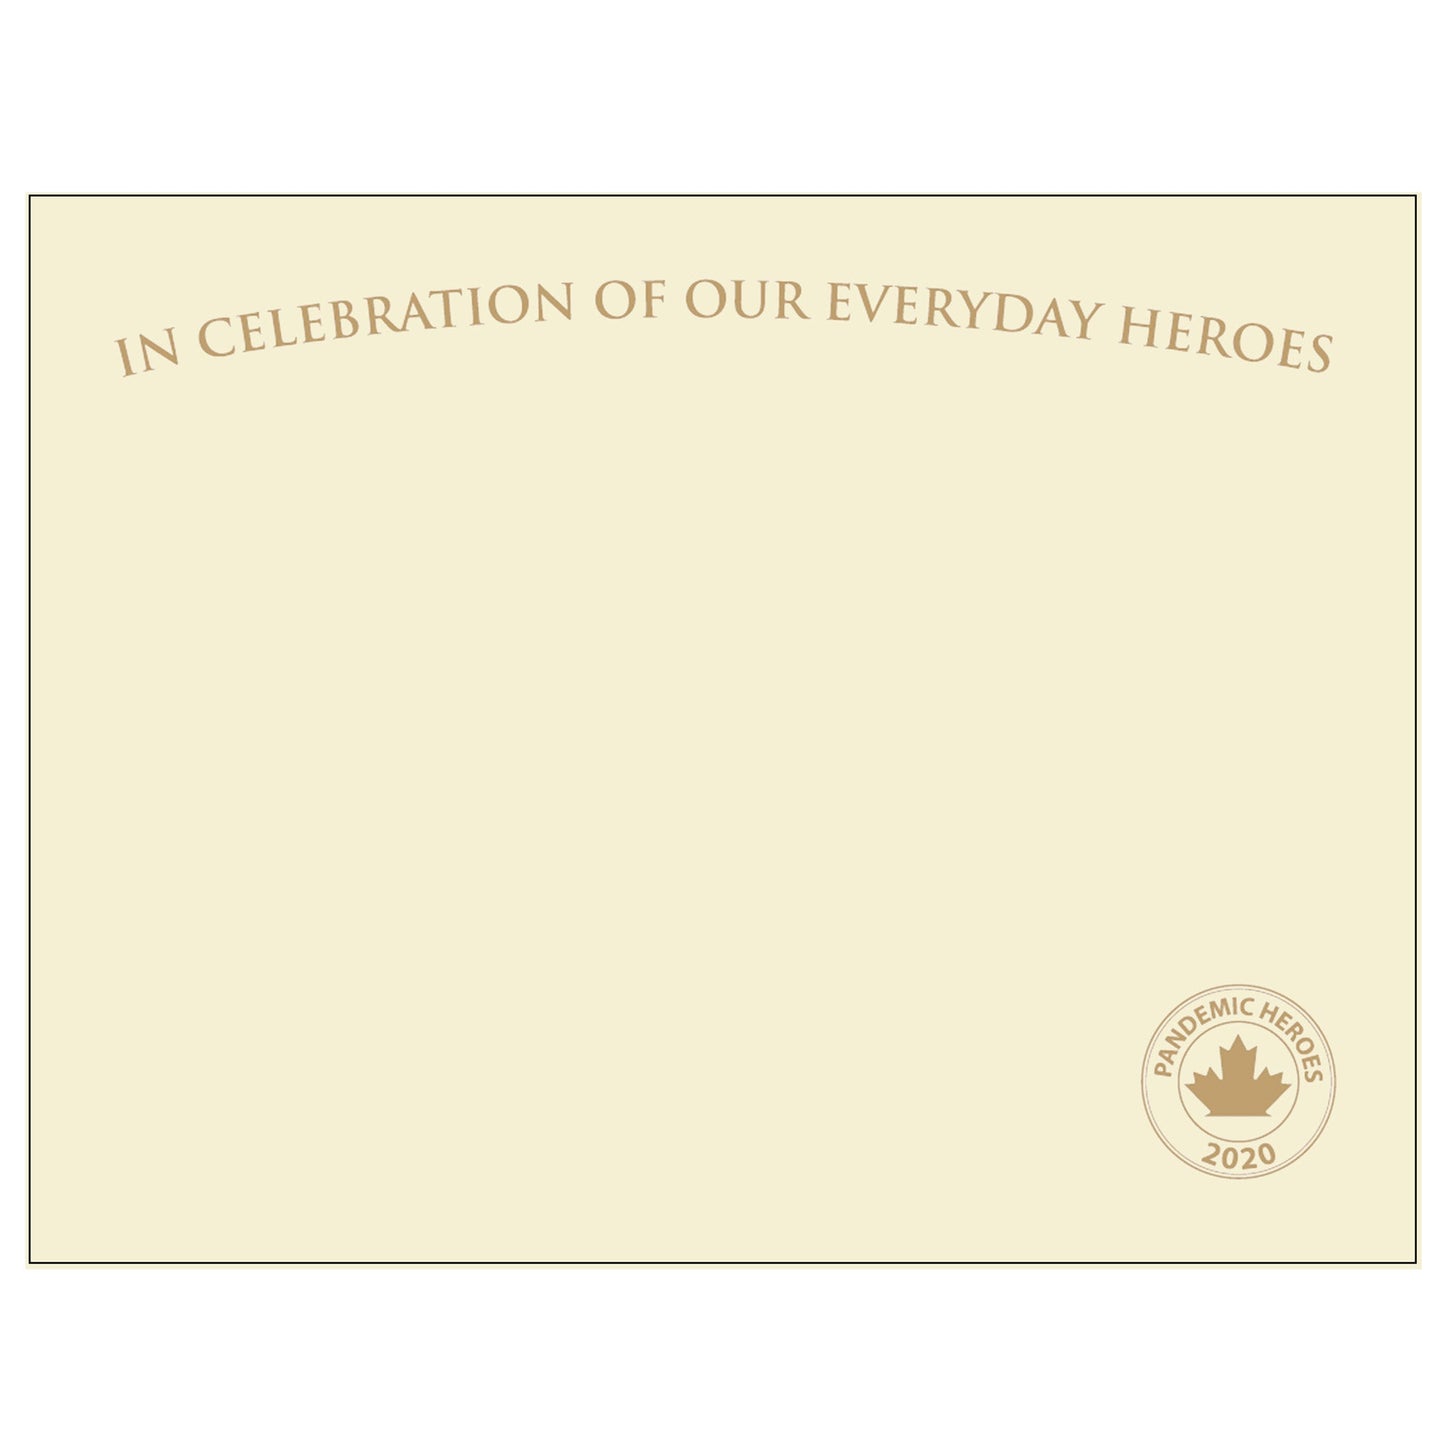 St. James® Premium Weight "Everyday Heroes" Certificates, Gold Foil, Ivory, 65 lb, 8.5 x 11", Pack of 25